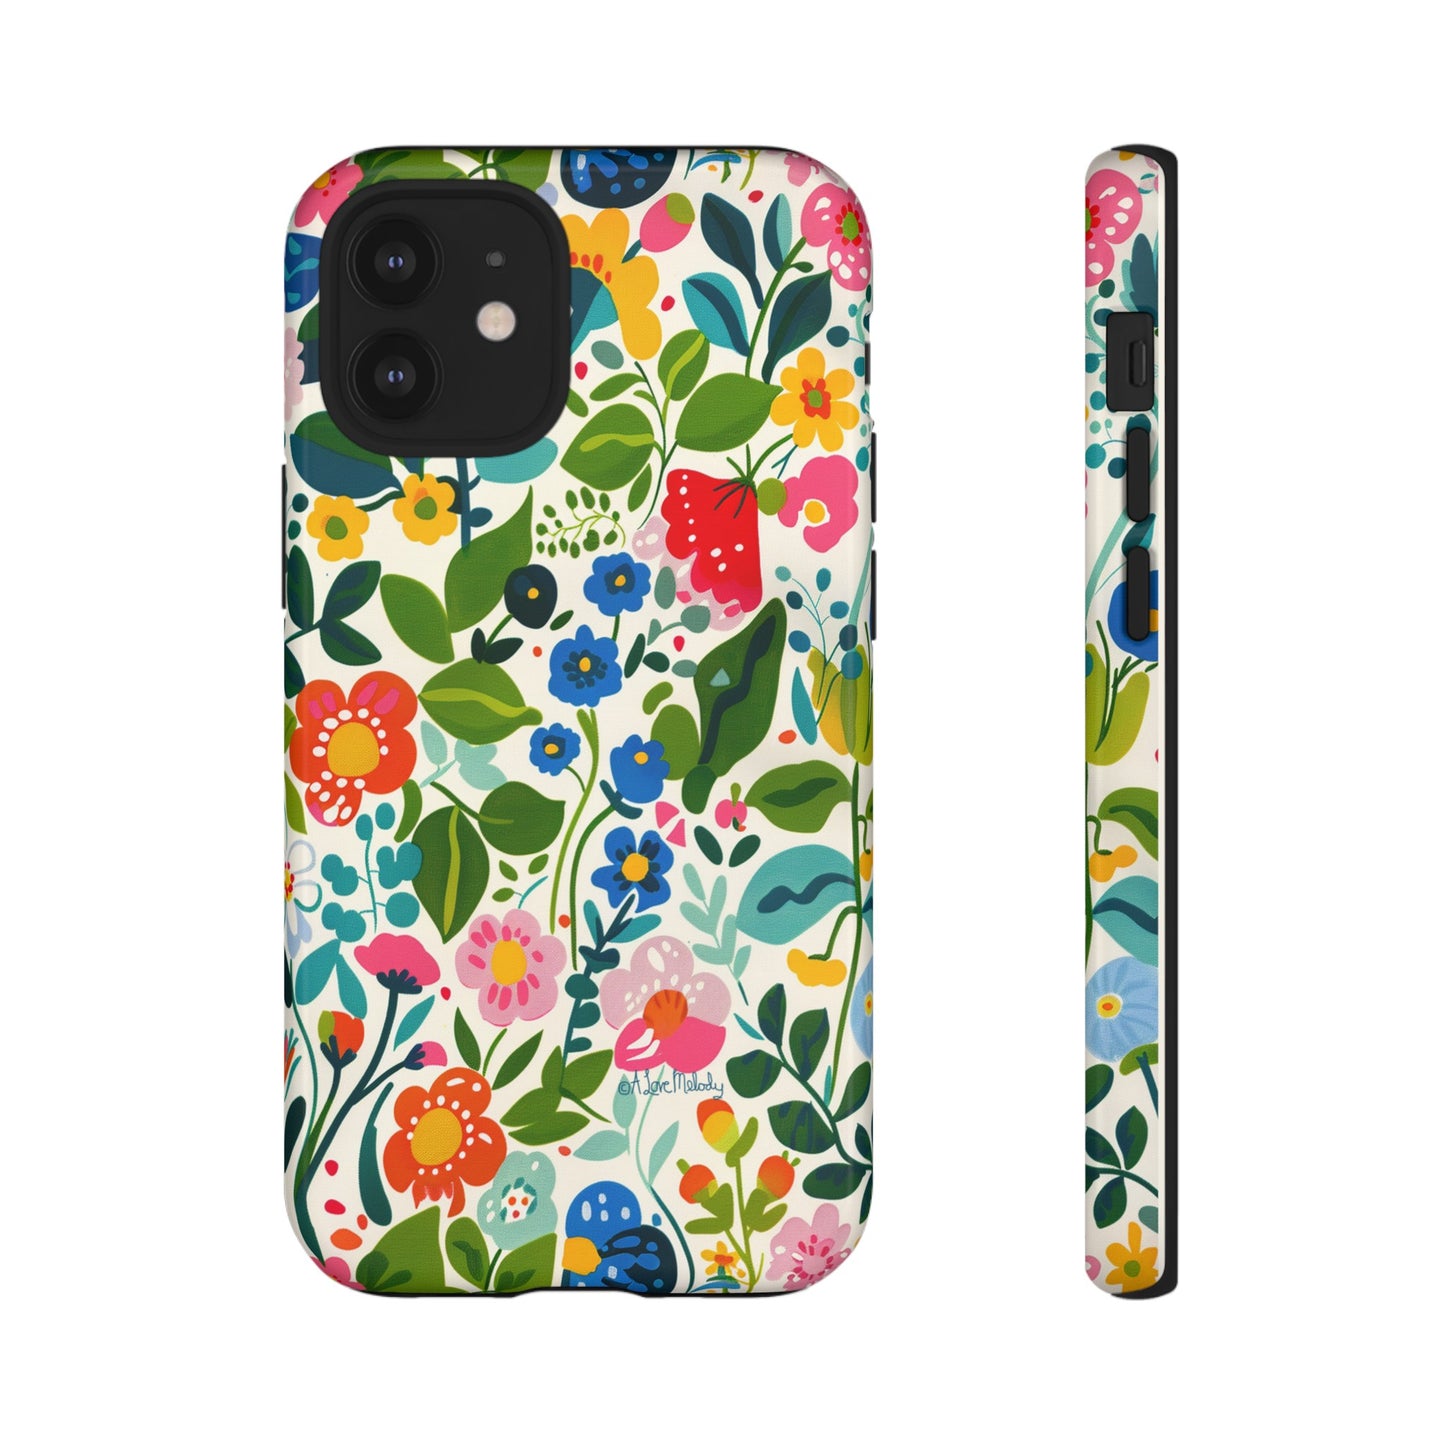 Spring Celebration in Flowers Tough Phone Cases